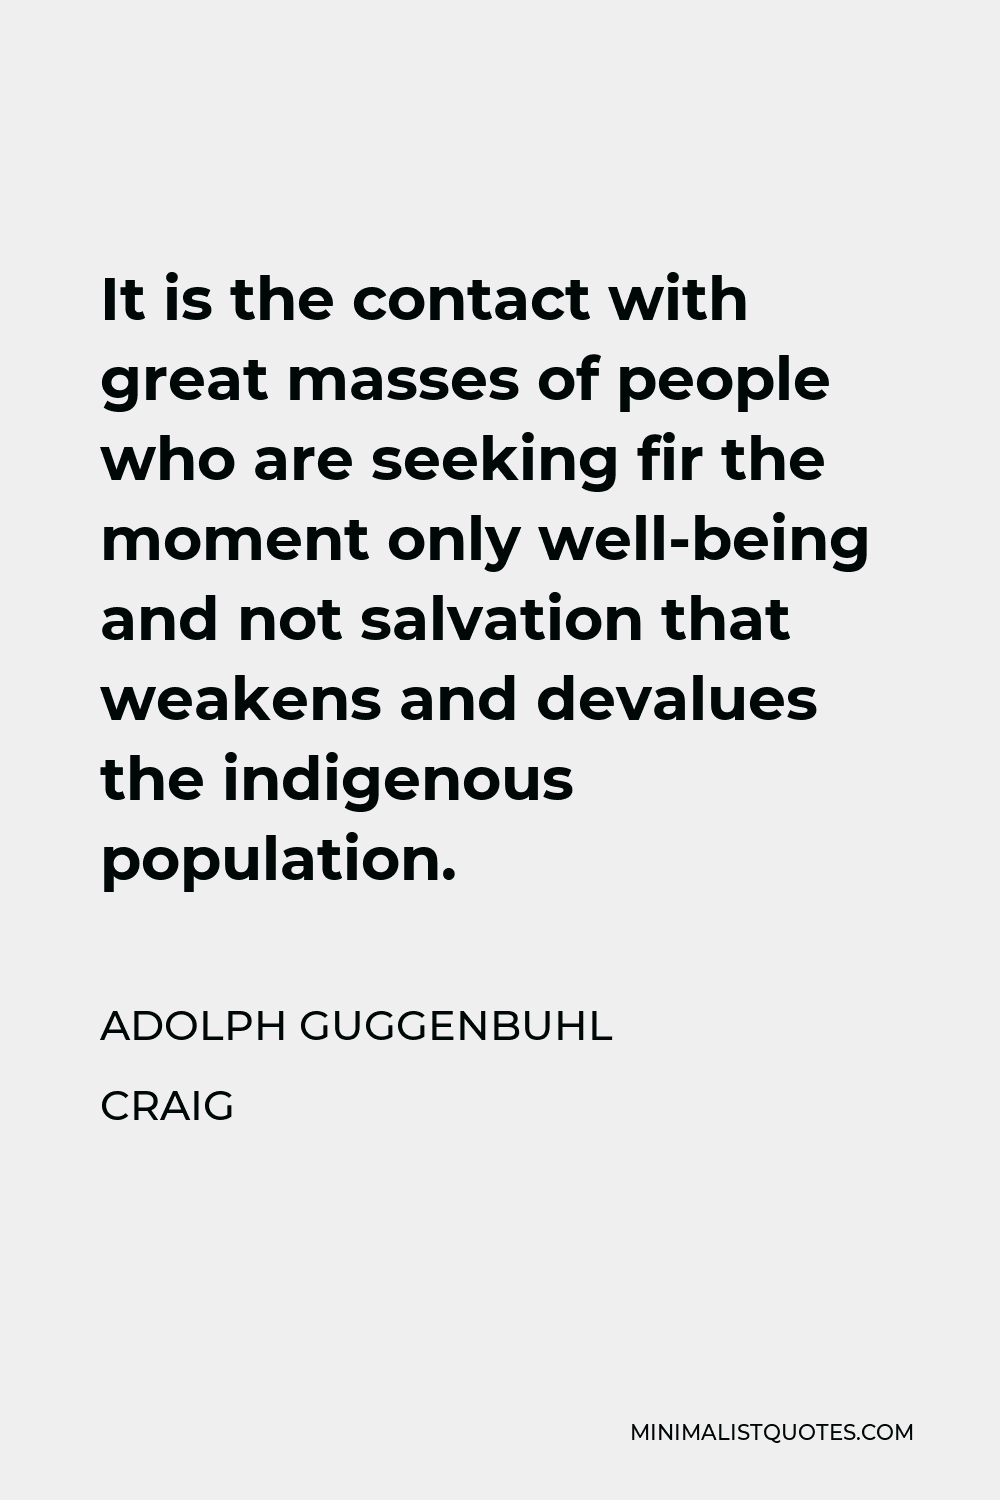 Adolph Guggenbuhl Craig Quote - It is the contact with great masses of people who are seeking fir the moment only well-being and not salvation that weakens and devalues the indigenous population.